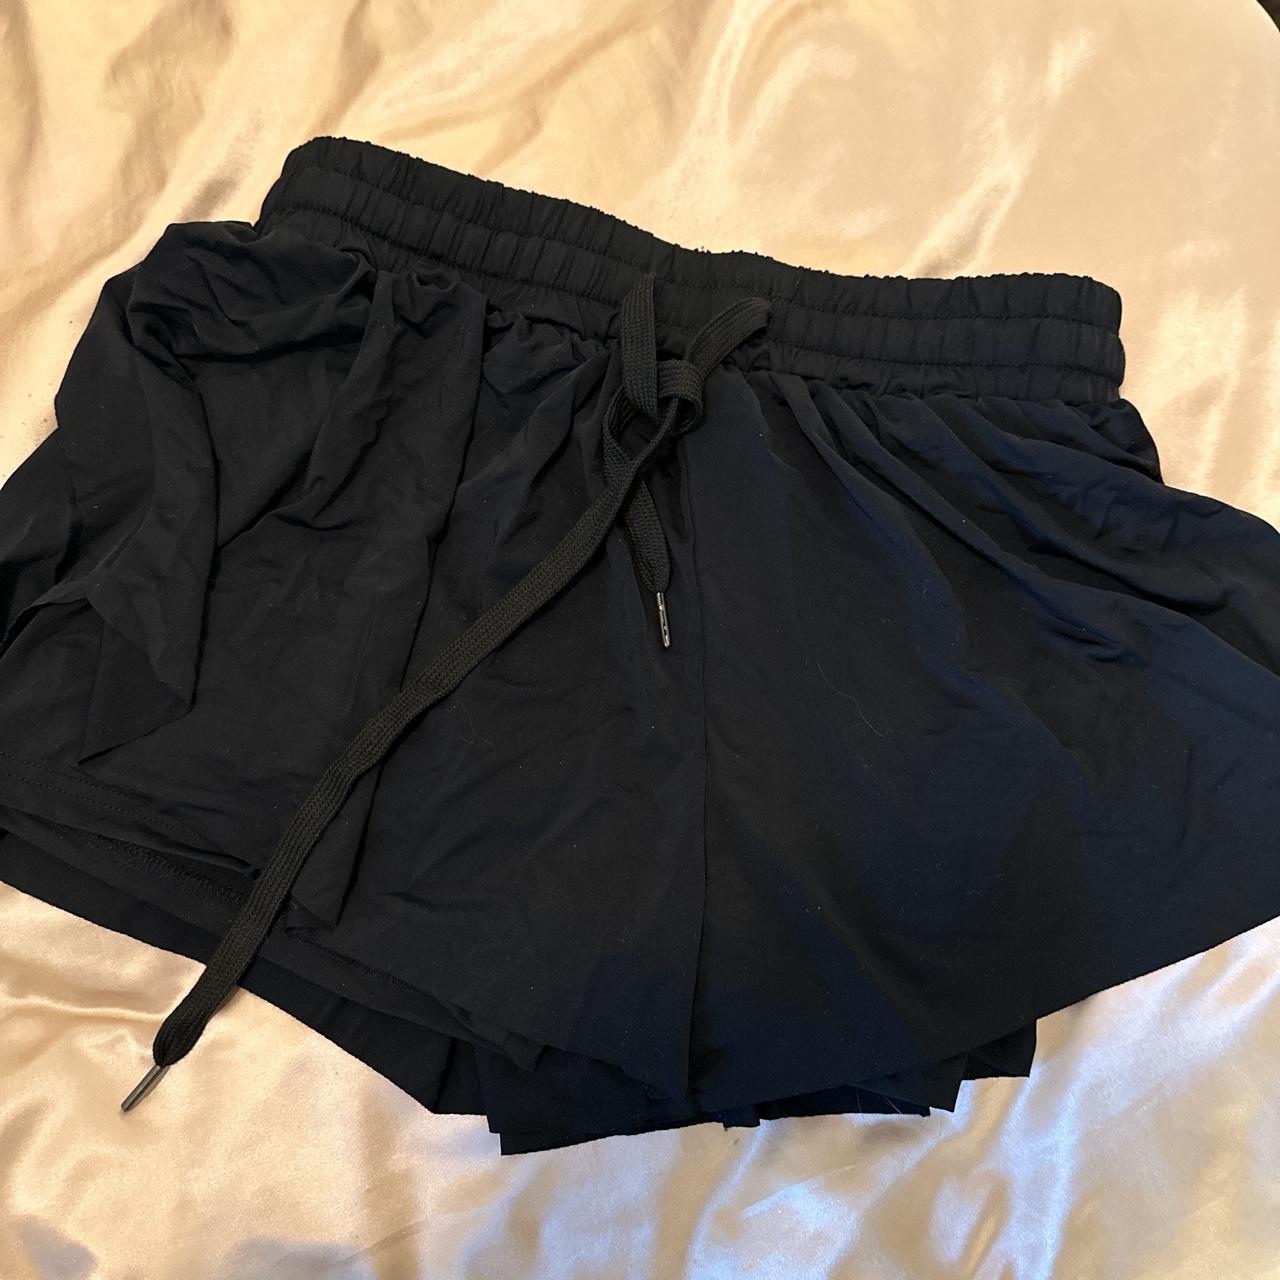 Halara dupe flowy shorts! Brand new with tags! - Depop